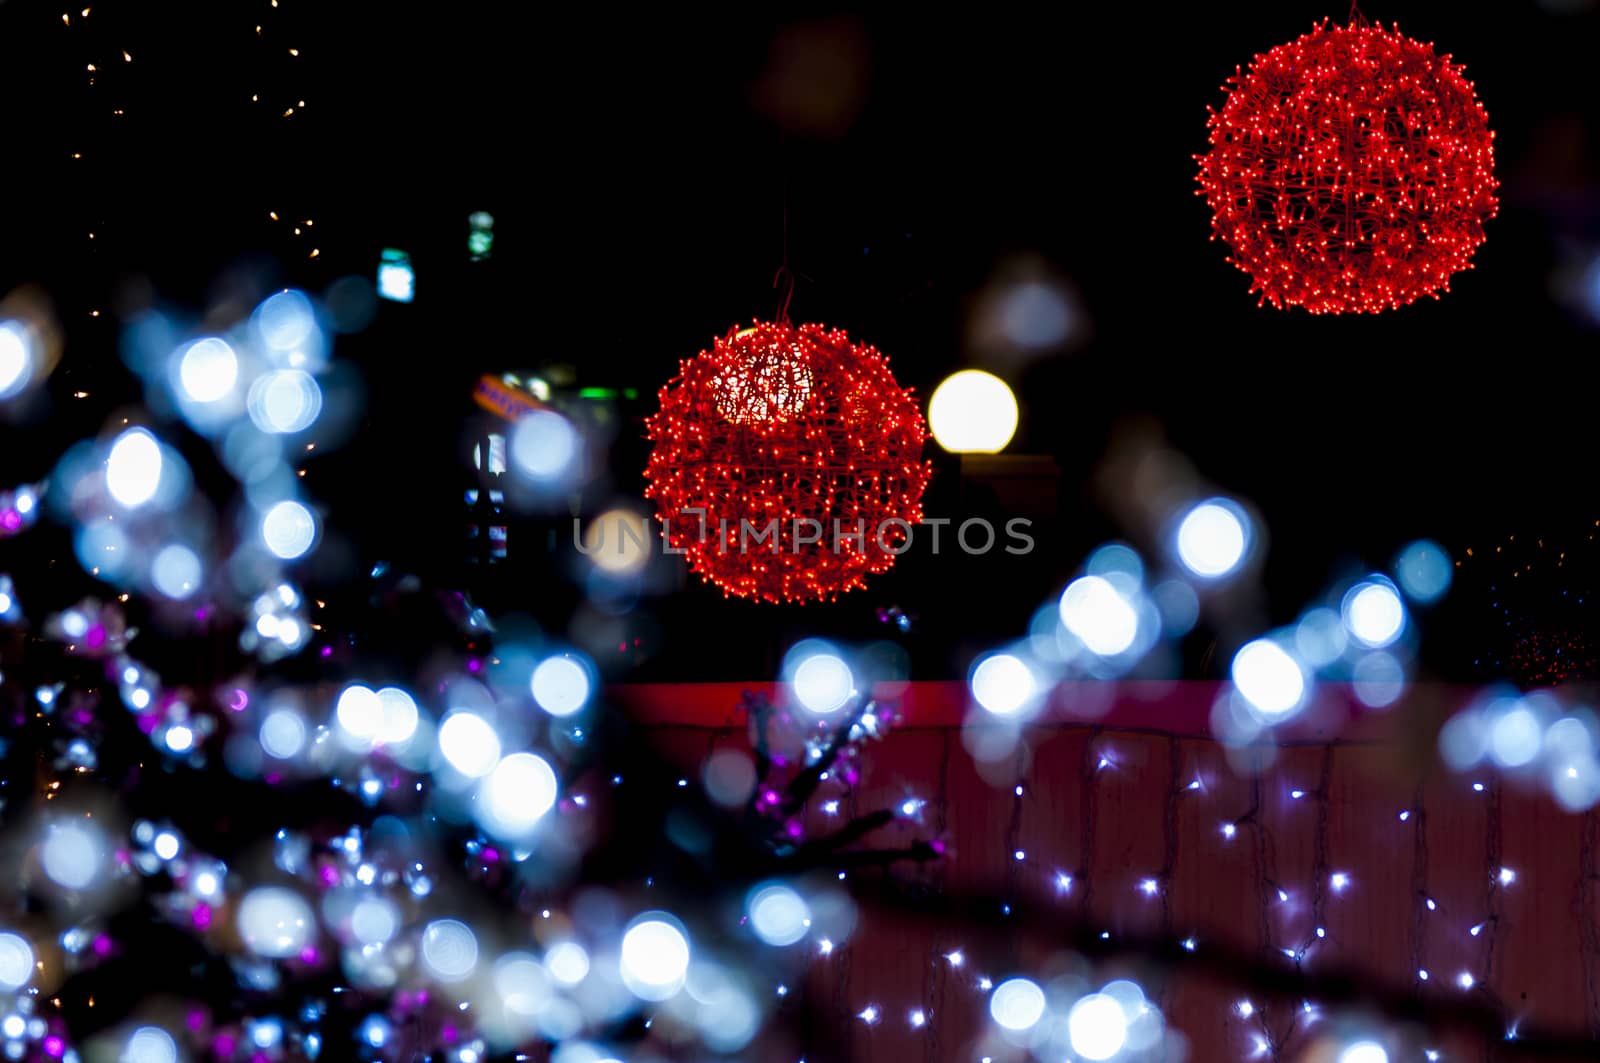 Red bright balls with white foreground lights by vangelis